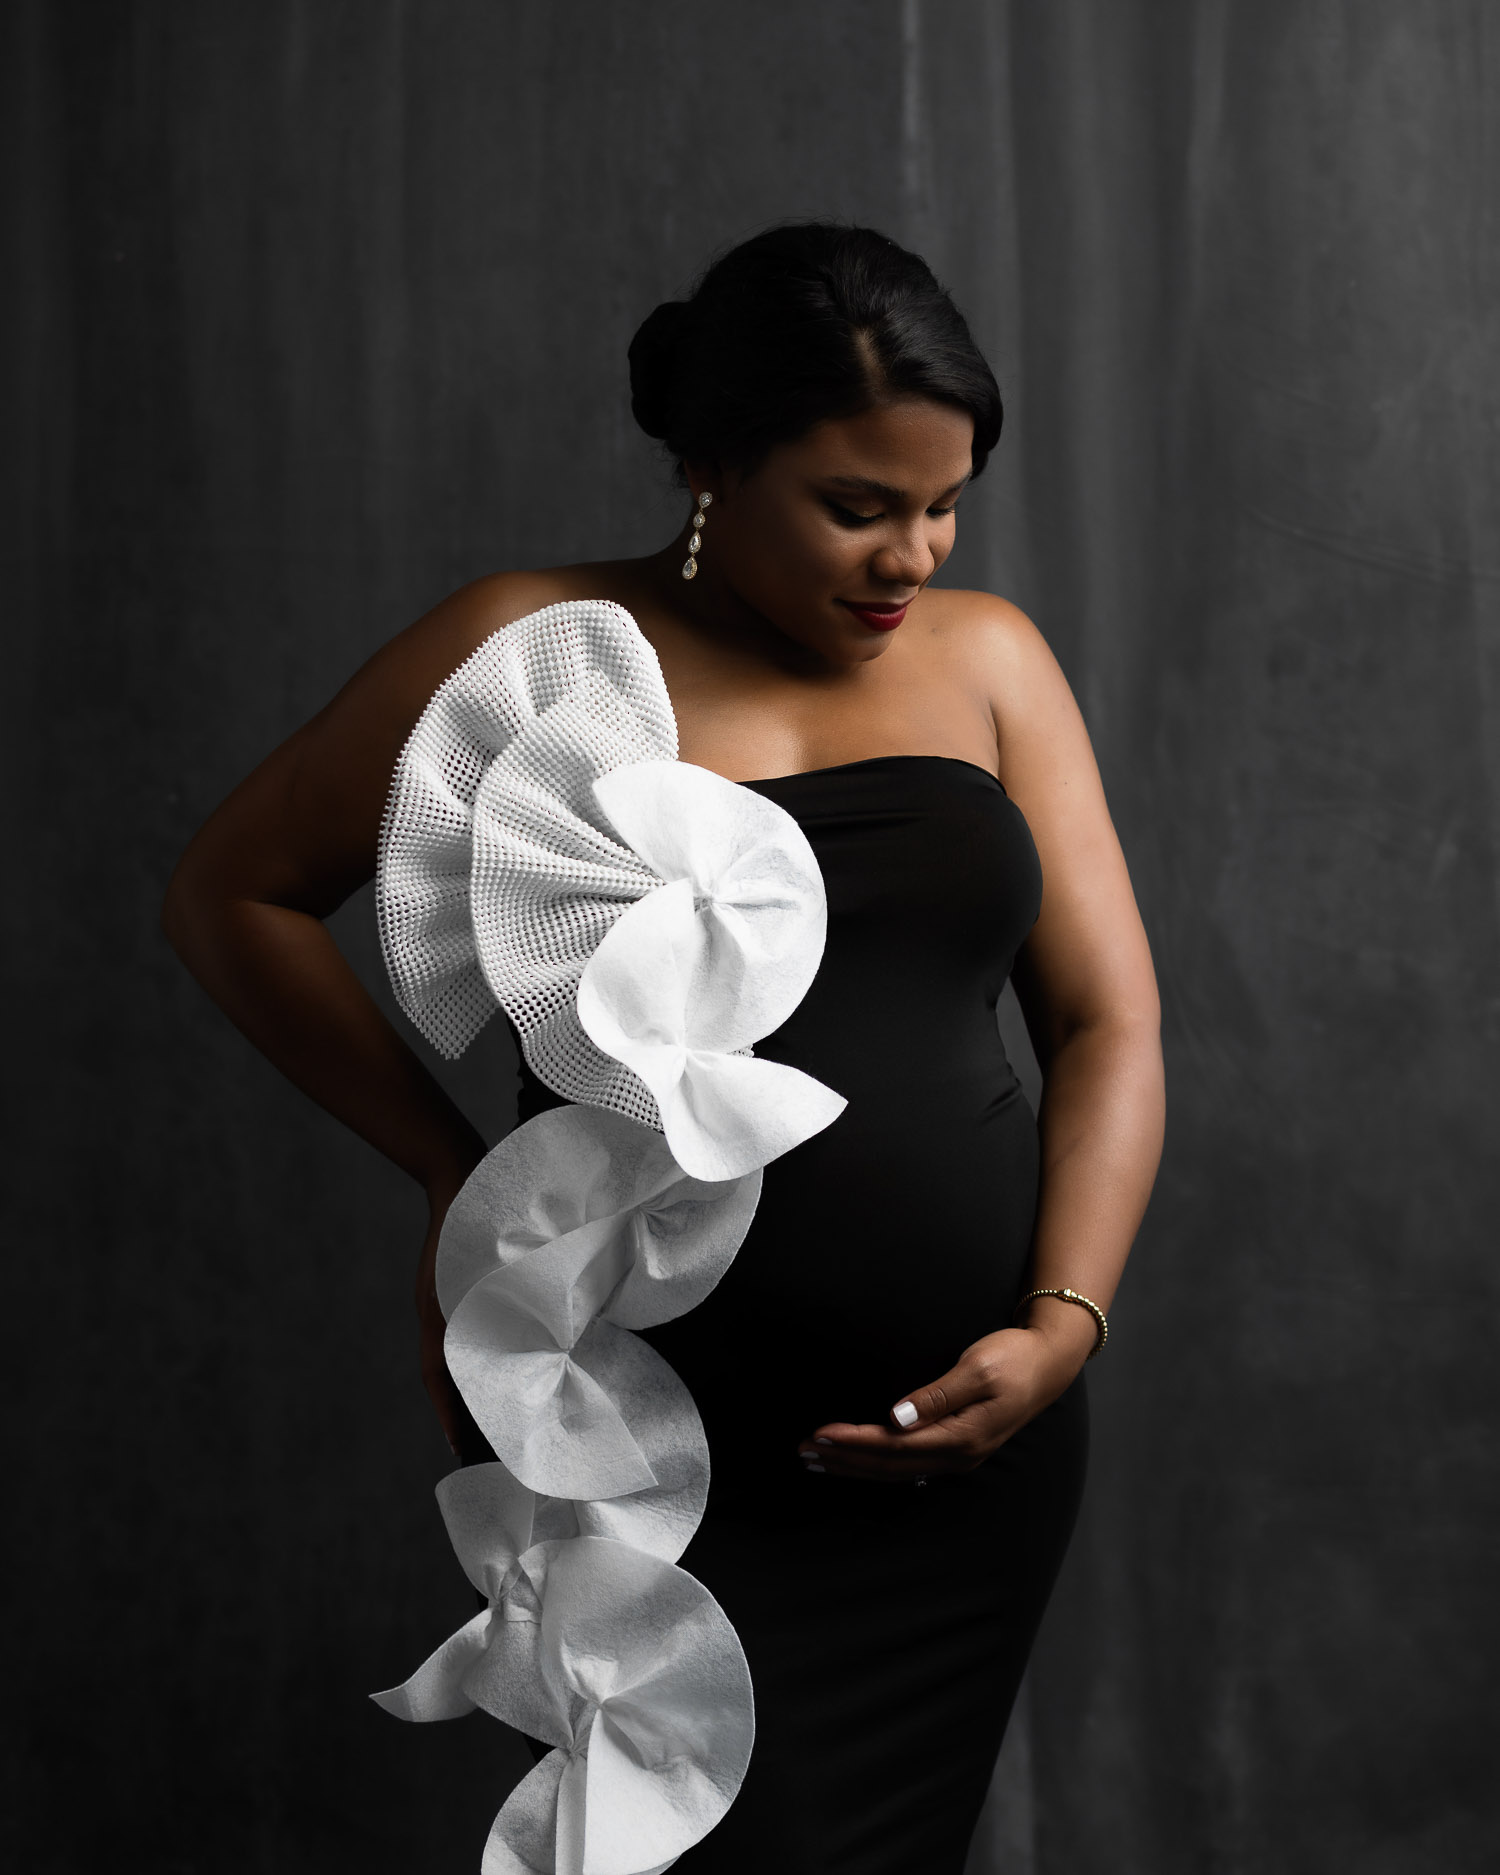 Timeless and elegant pregnant photography.